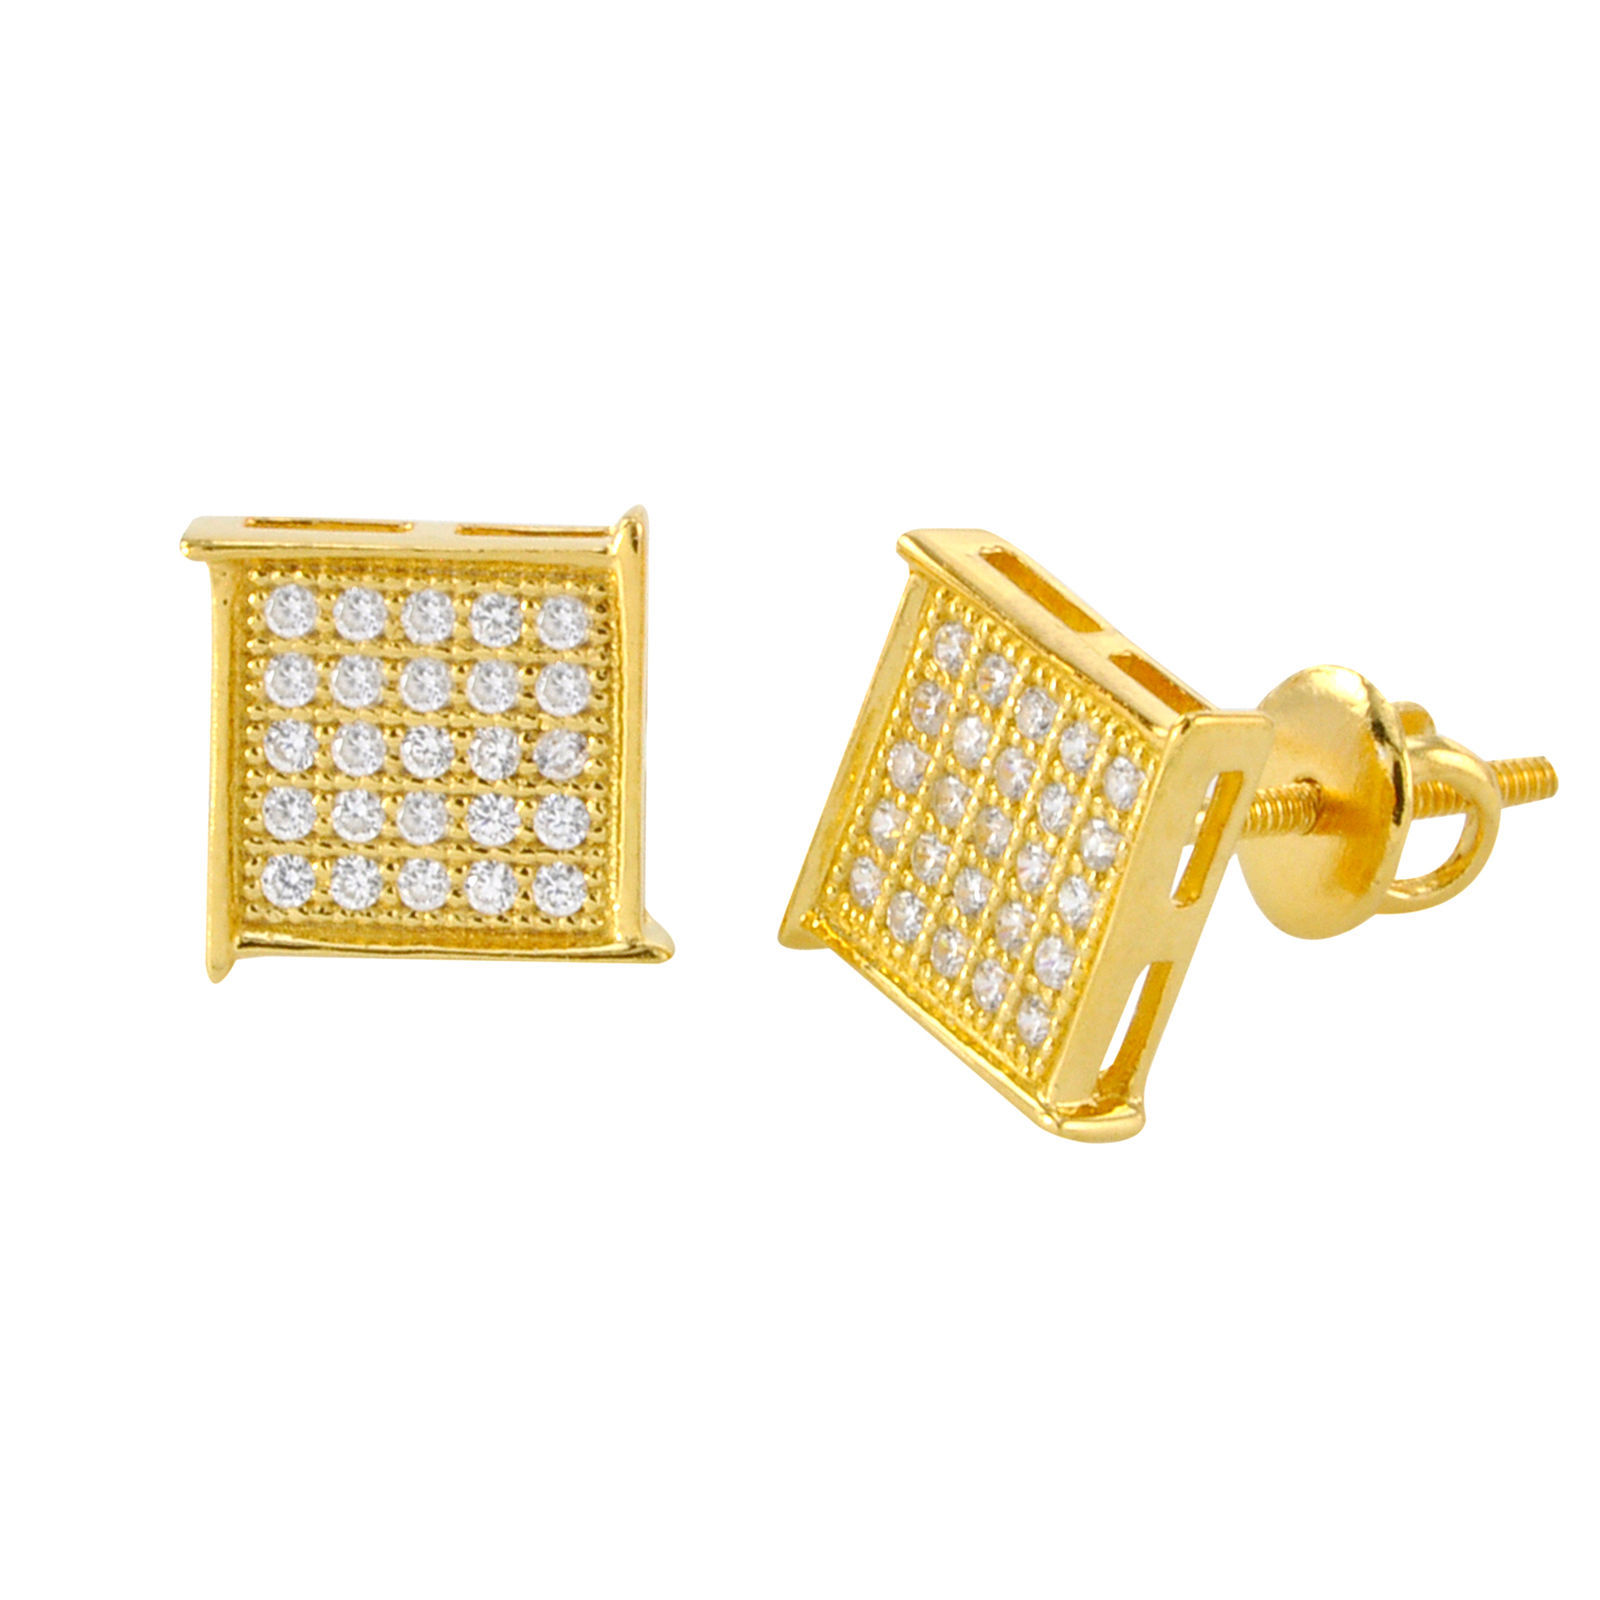 Sterling Silver Screwback Earrings Yellow Gold Plated 8mm Square Edge Overhang - $17.37